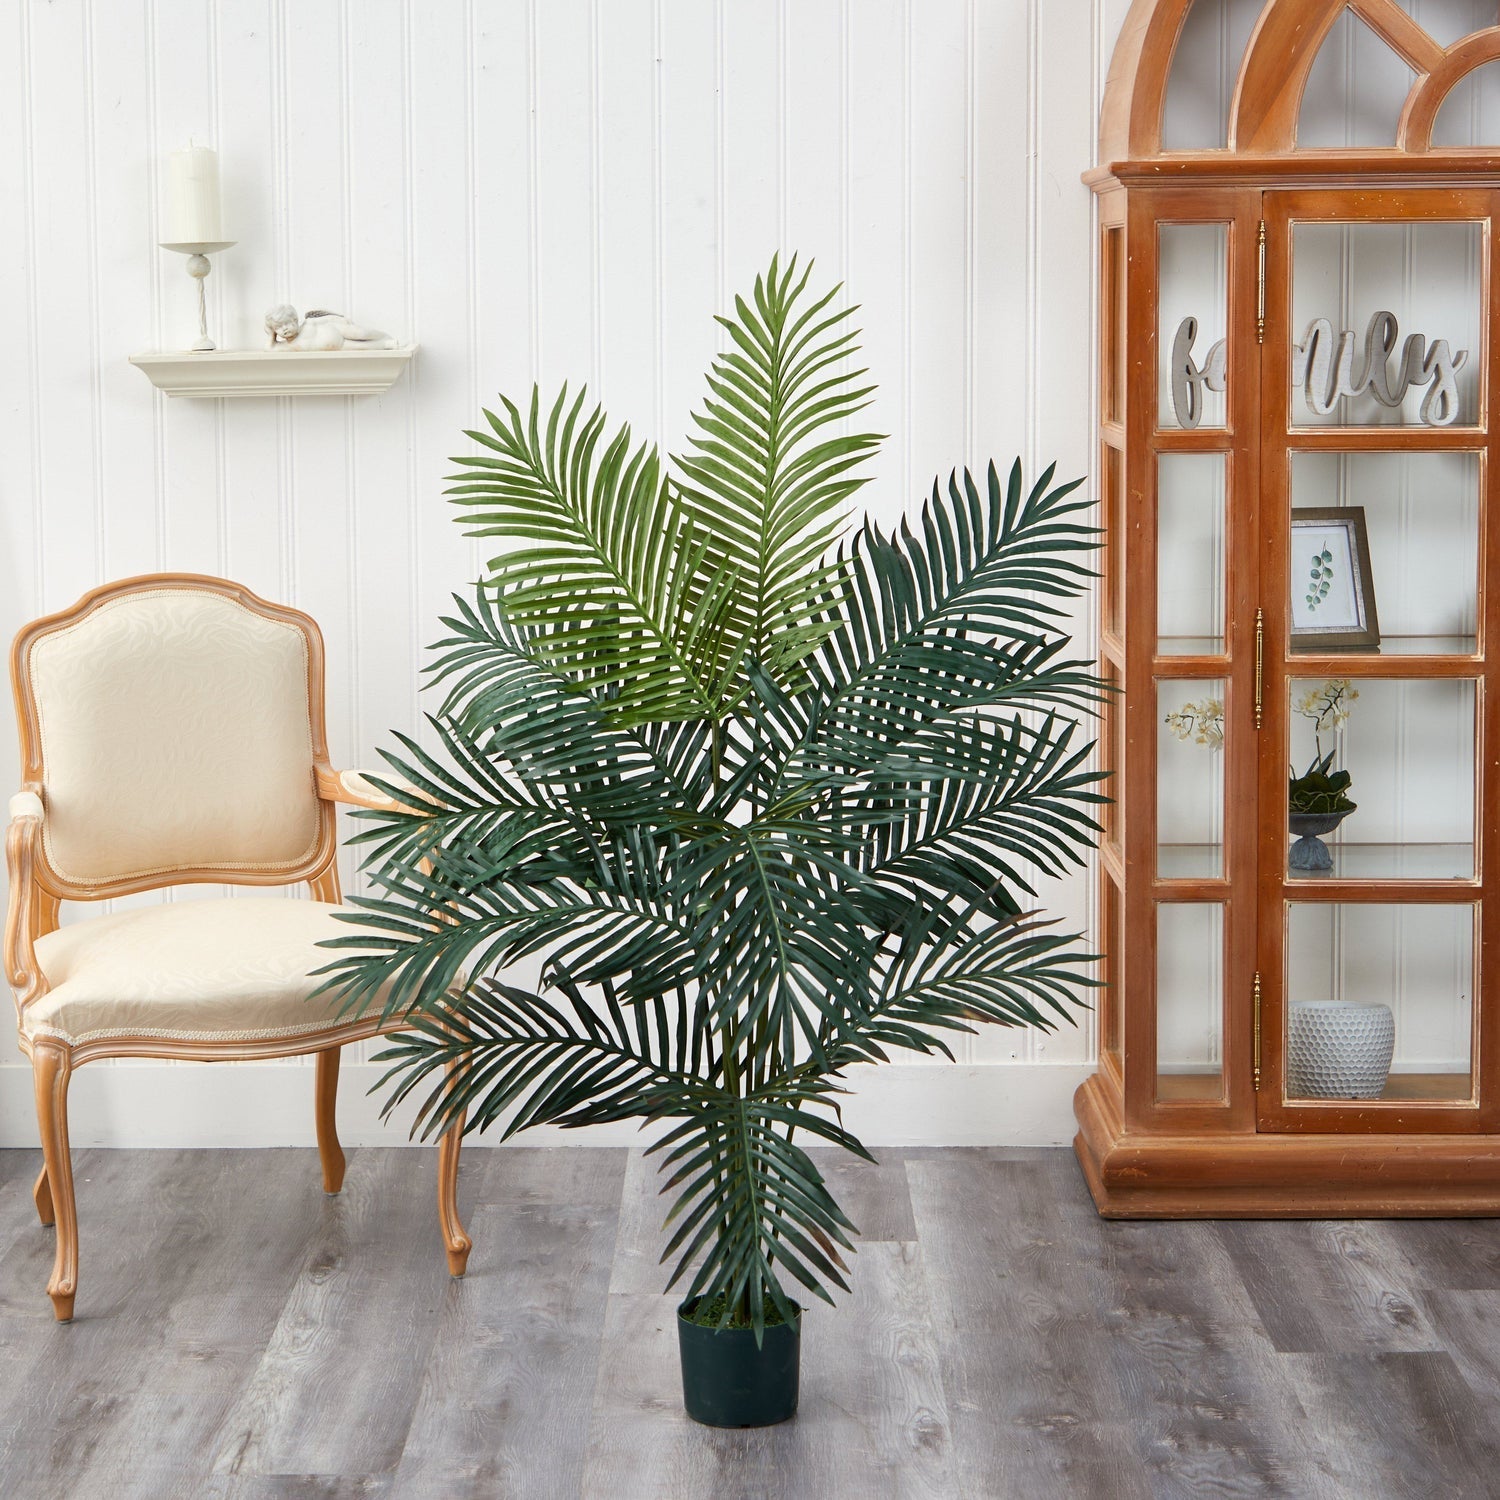 5 ft. Artificial Paradise Palm Silk Tree